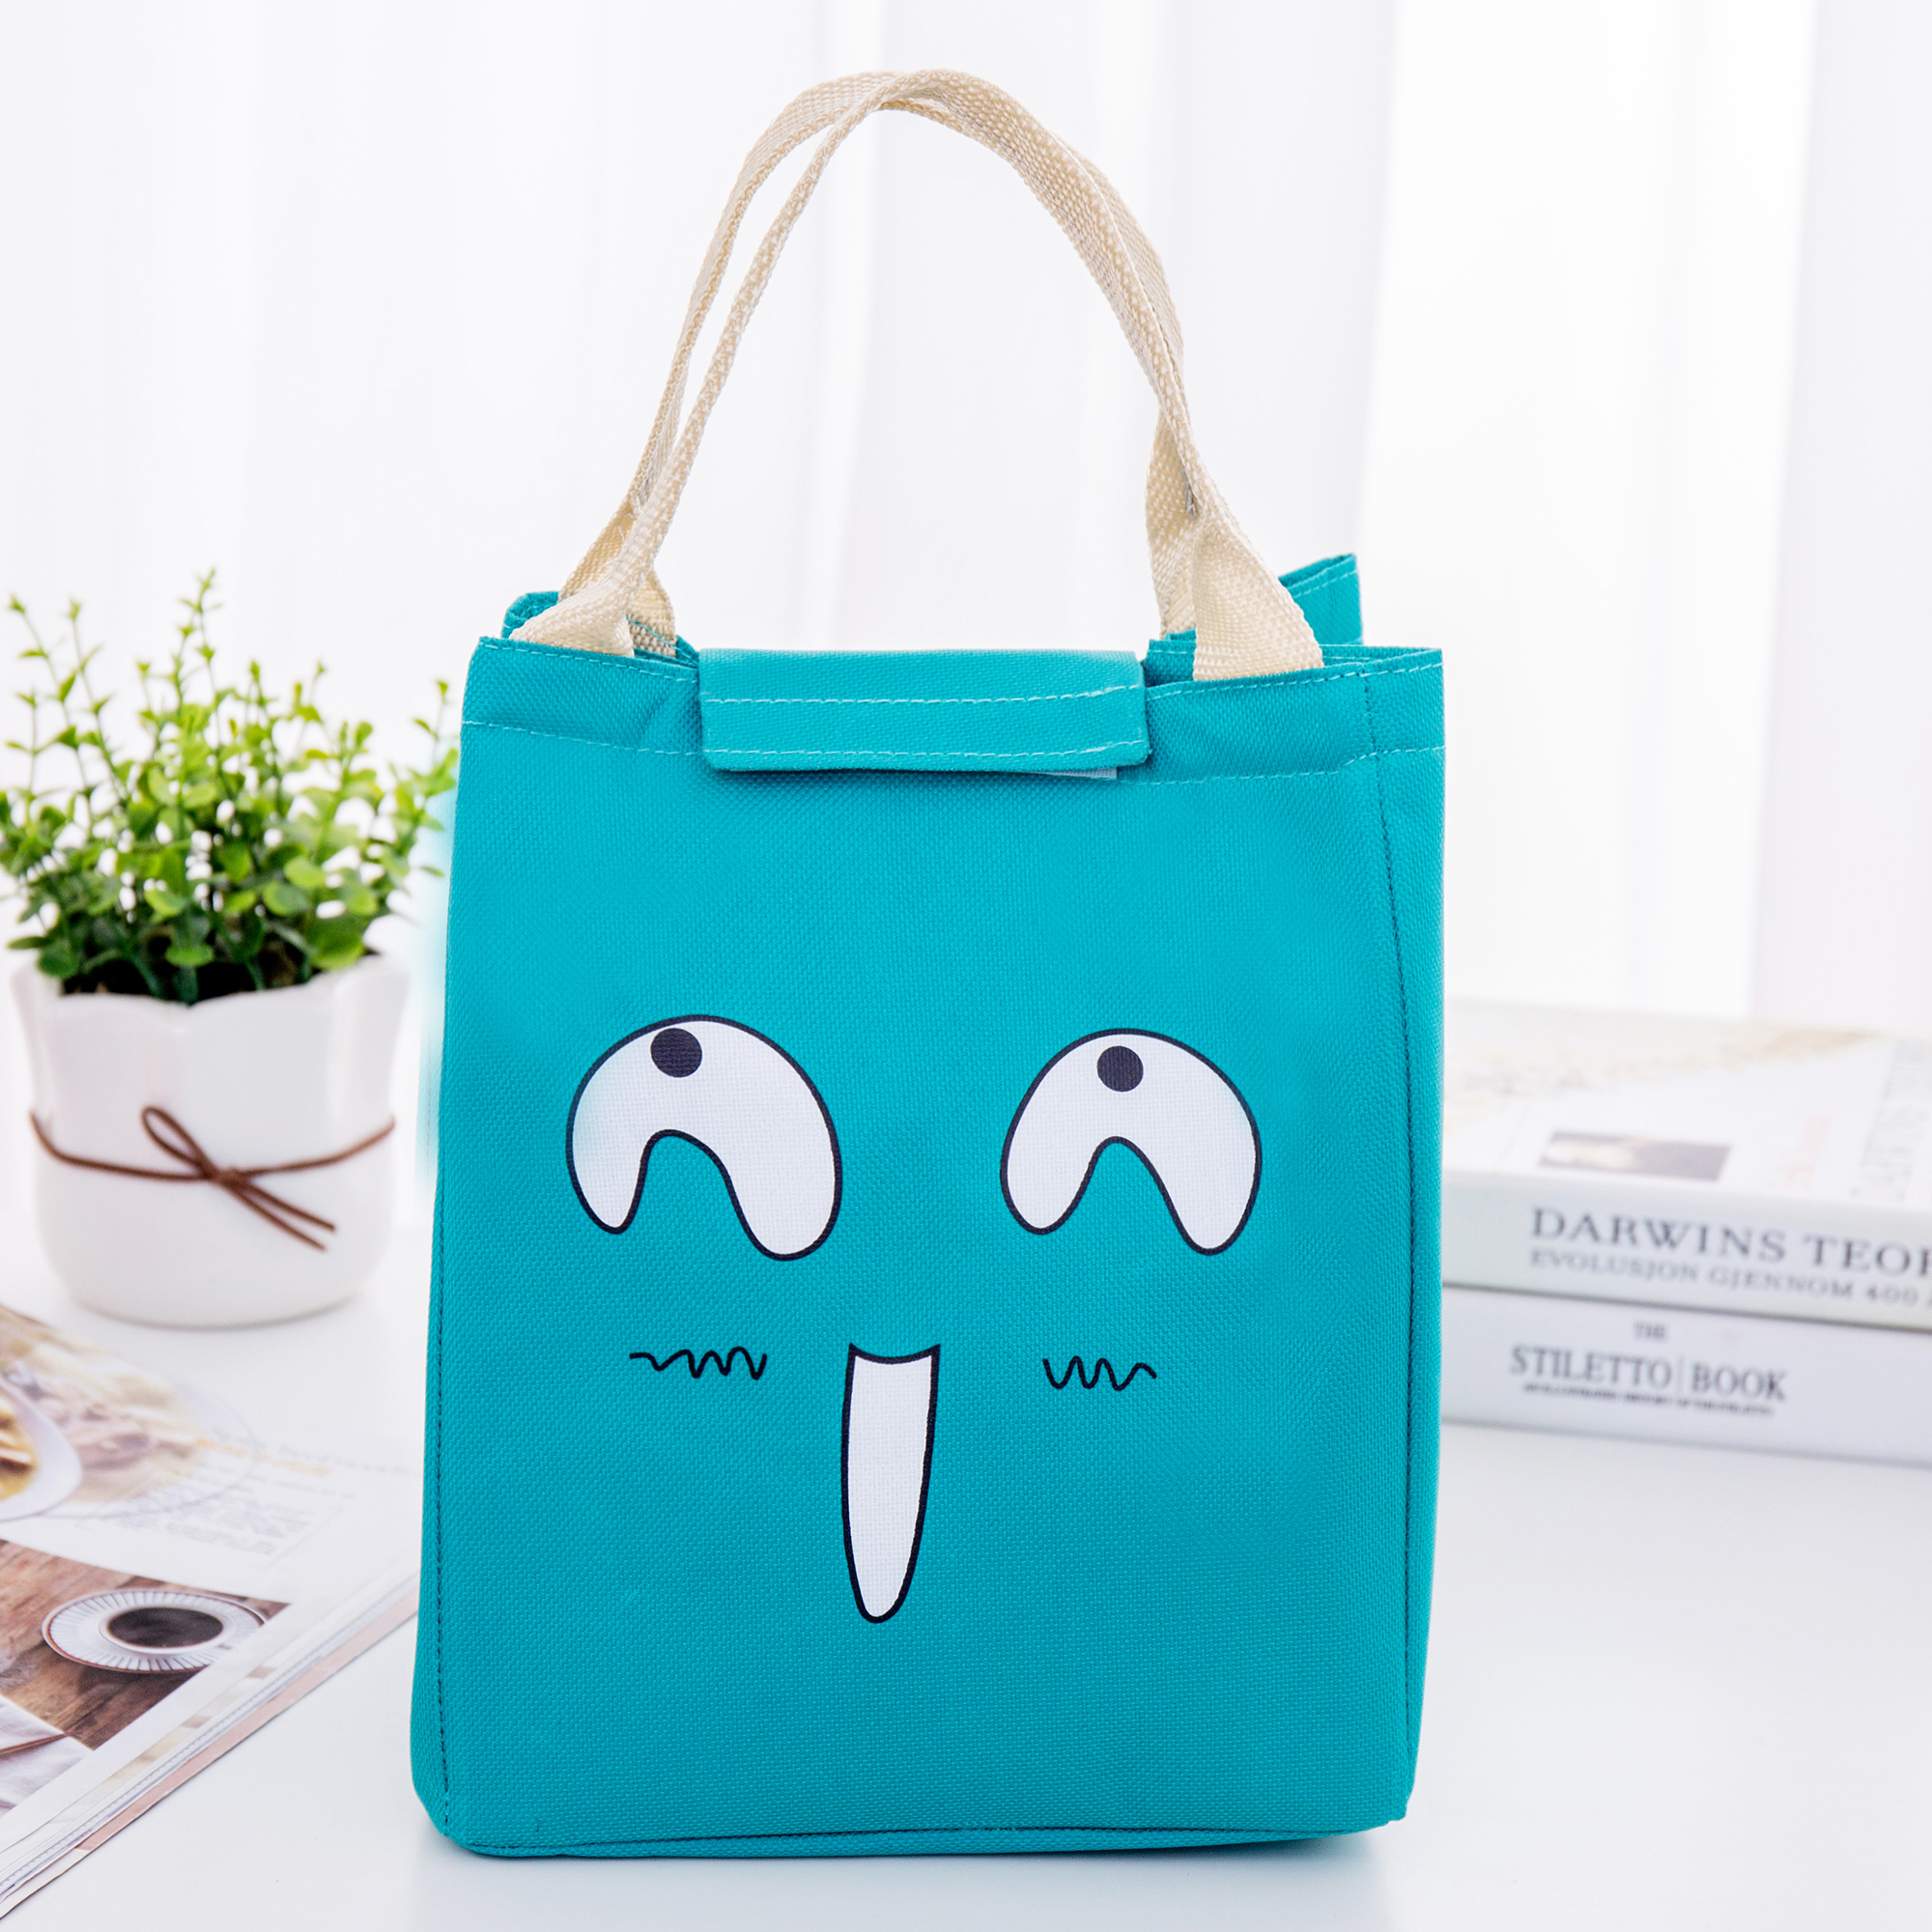 Lunch-Tote-Bag-Portable-Picnic-Cooler-Insulated-Handbag-Food-Storage-Container-1263595